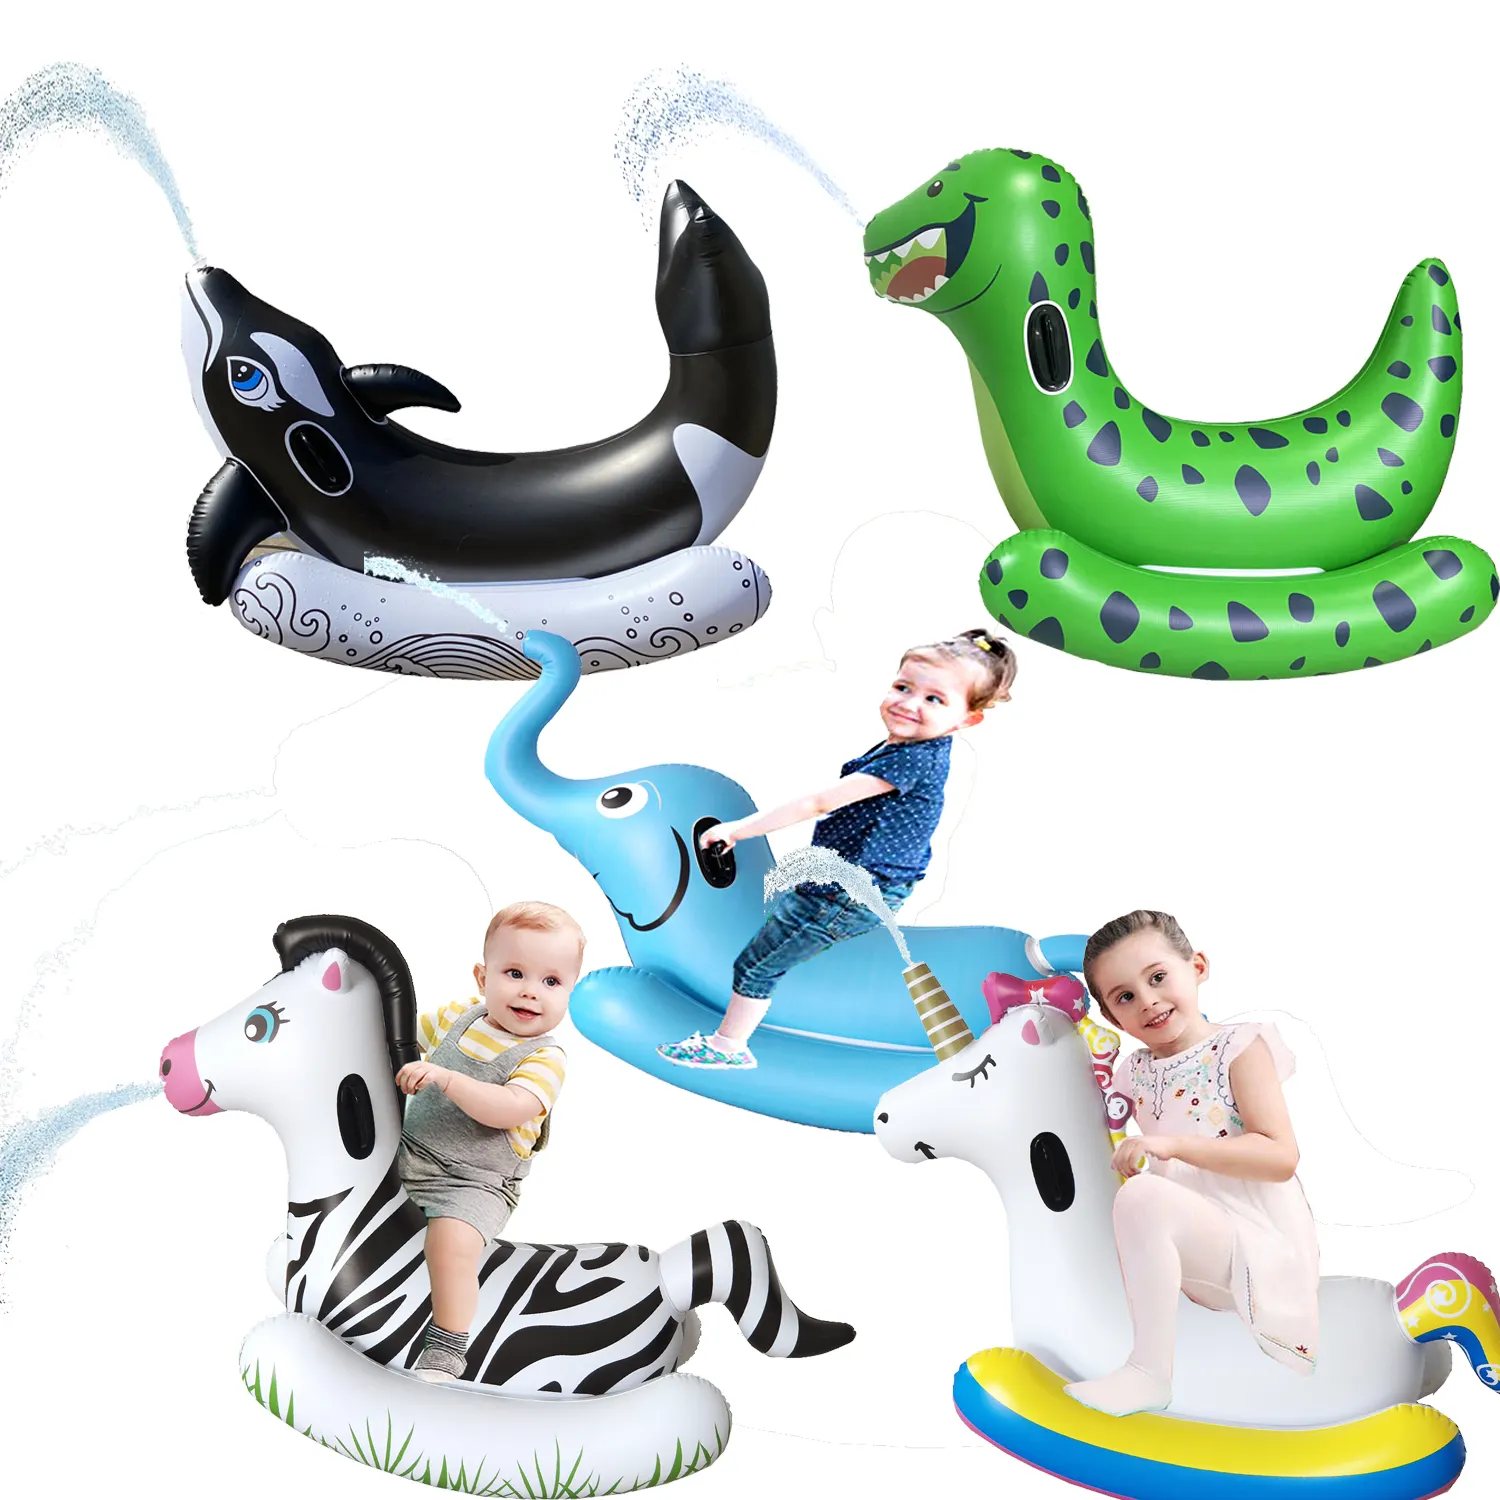 2022 new design animal shape inflatable animal indoor outdoor inflatable sprinkler toy for kids play